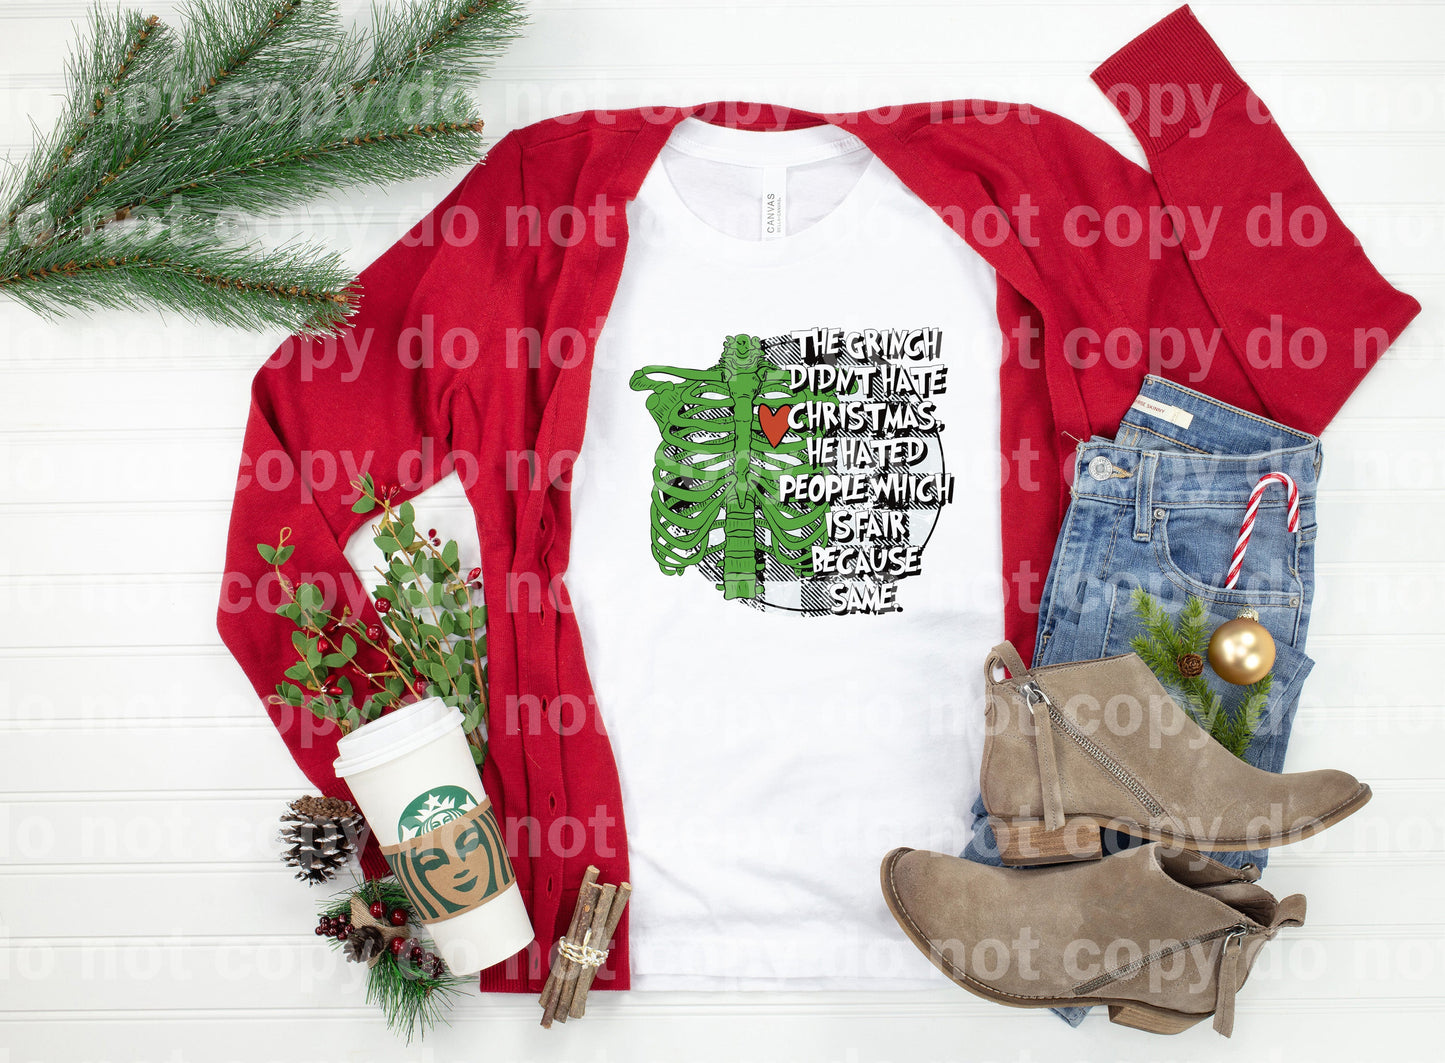 The Green Guy Didn't Hate Christmas Dream Print or Sublimation Print